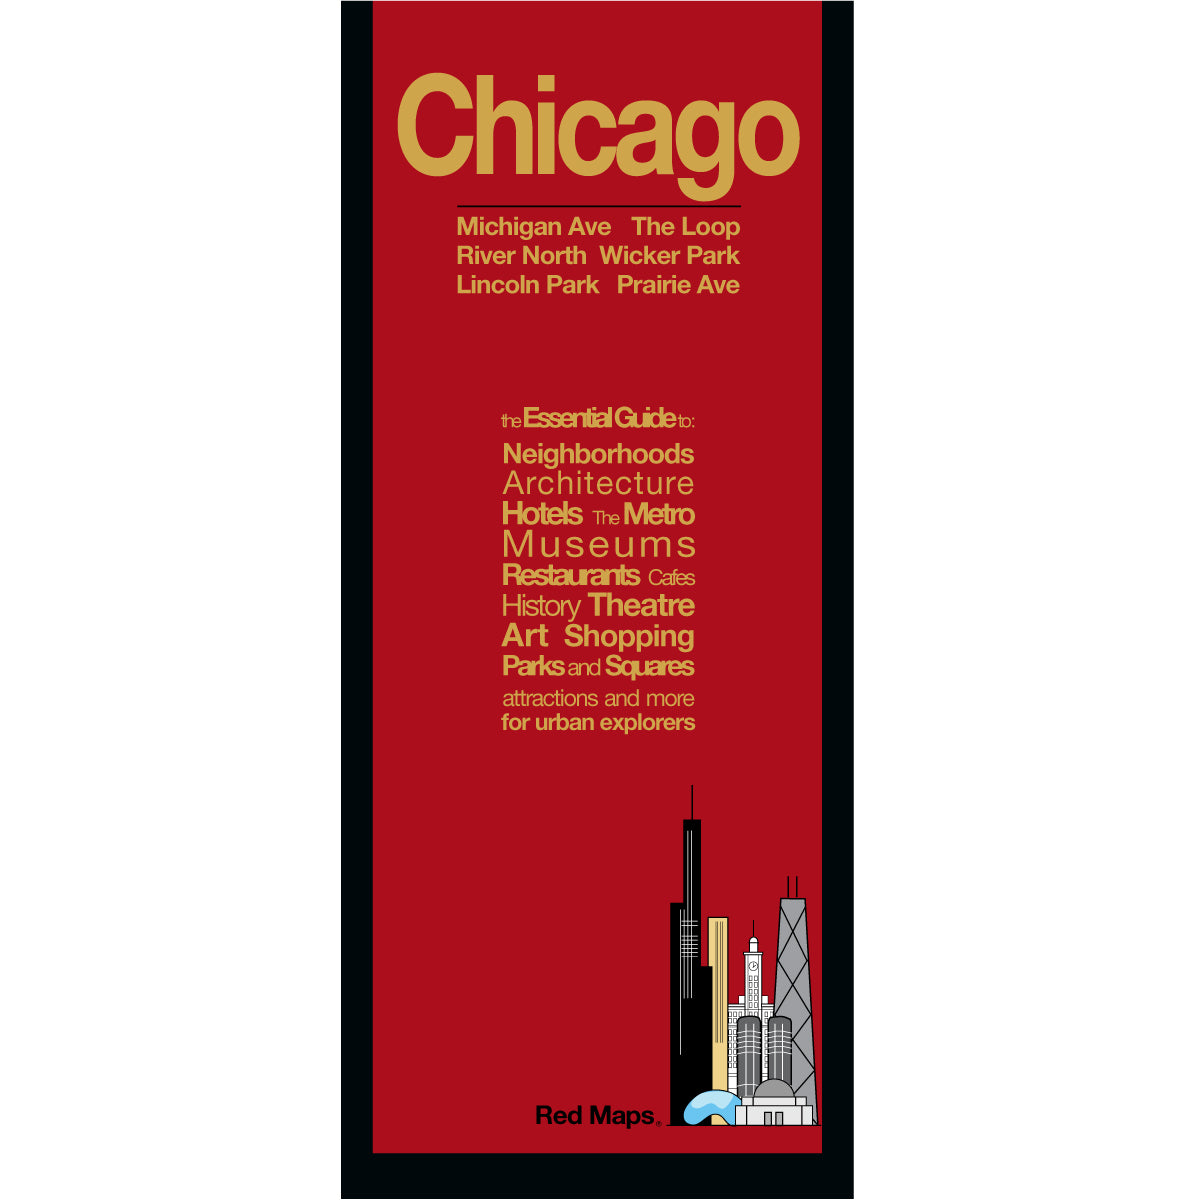 Chicago foldout city map with a red colored cover.